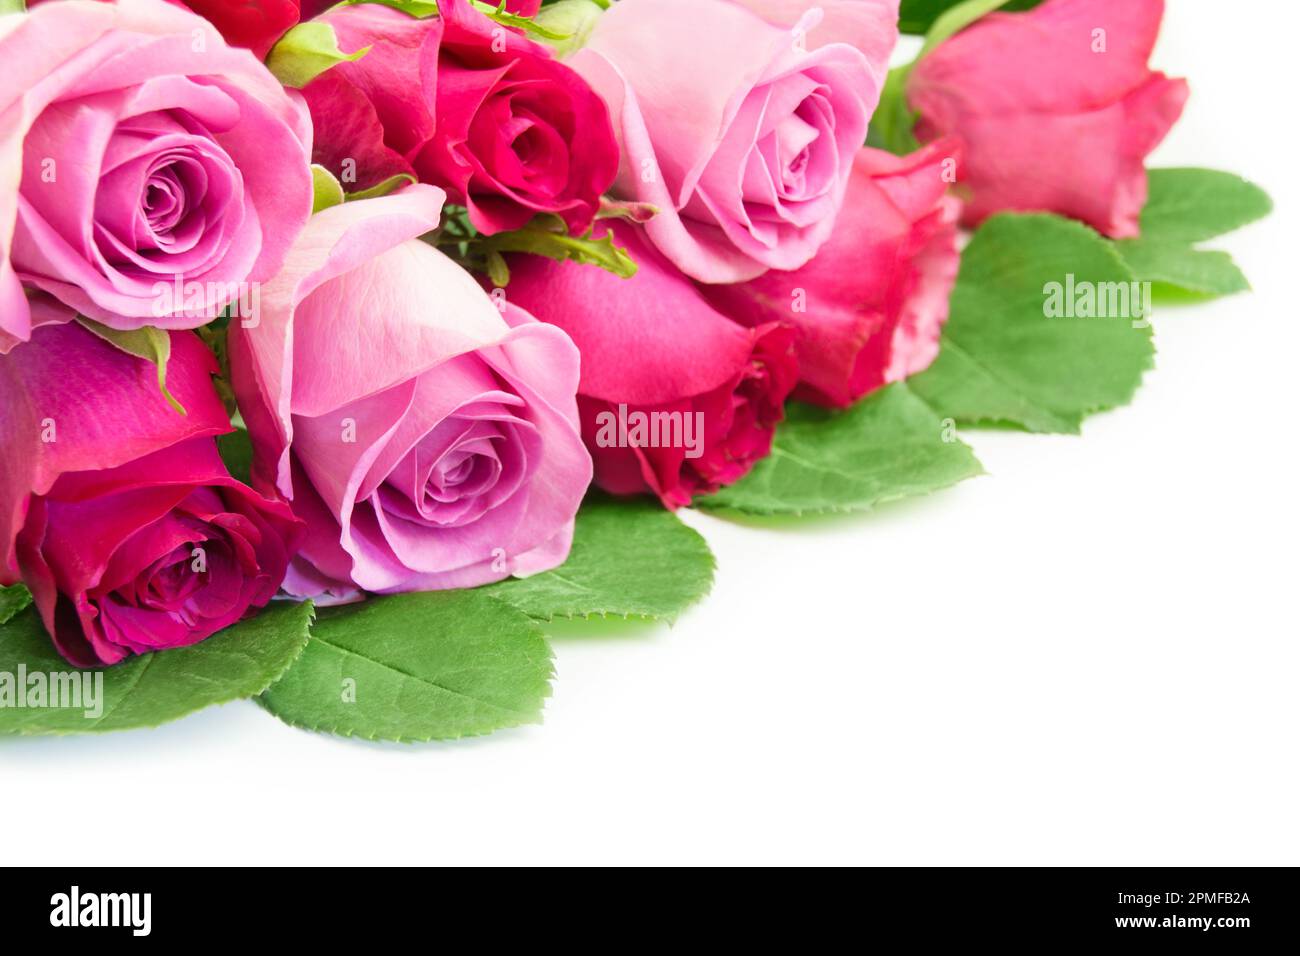 Bouquet of red and pink roses close up on white background Stock Photo